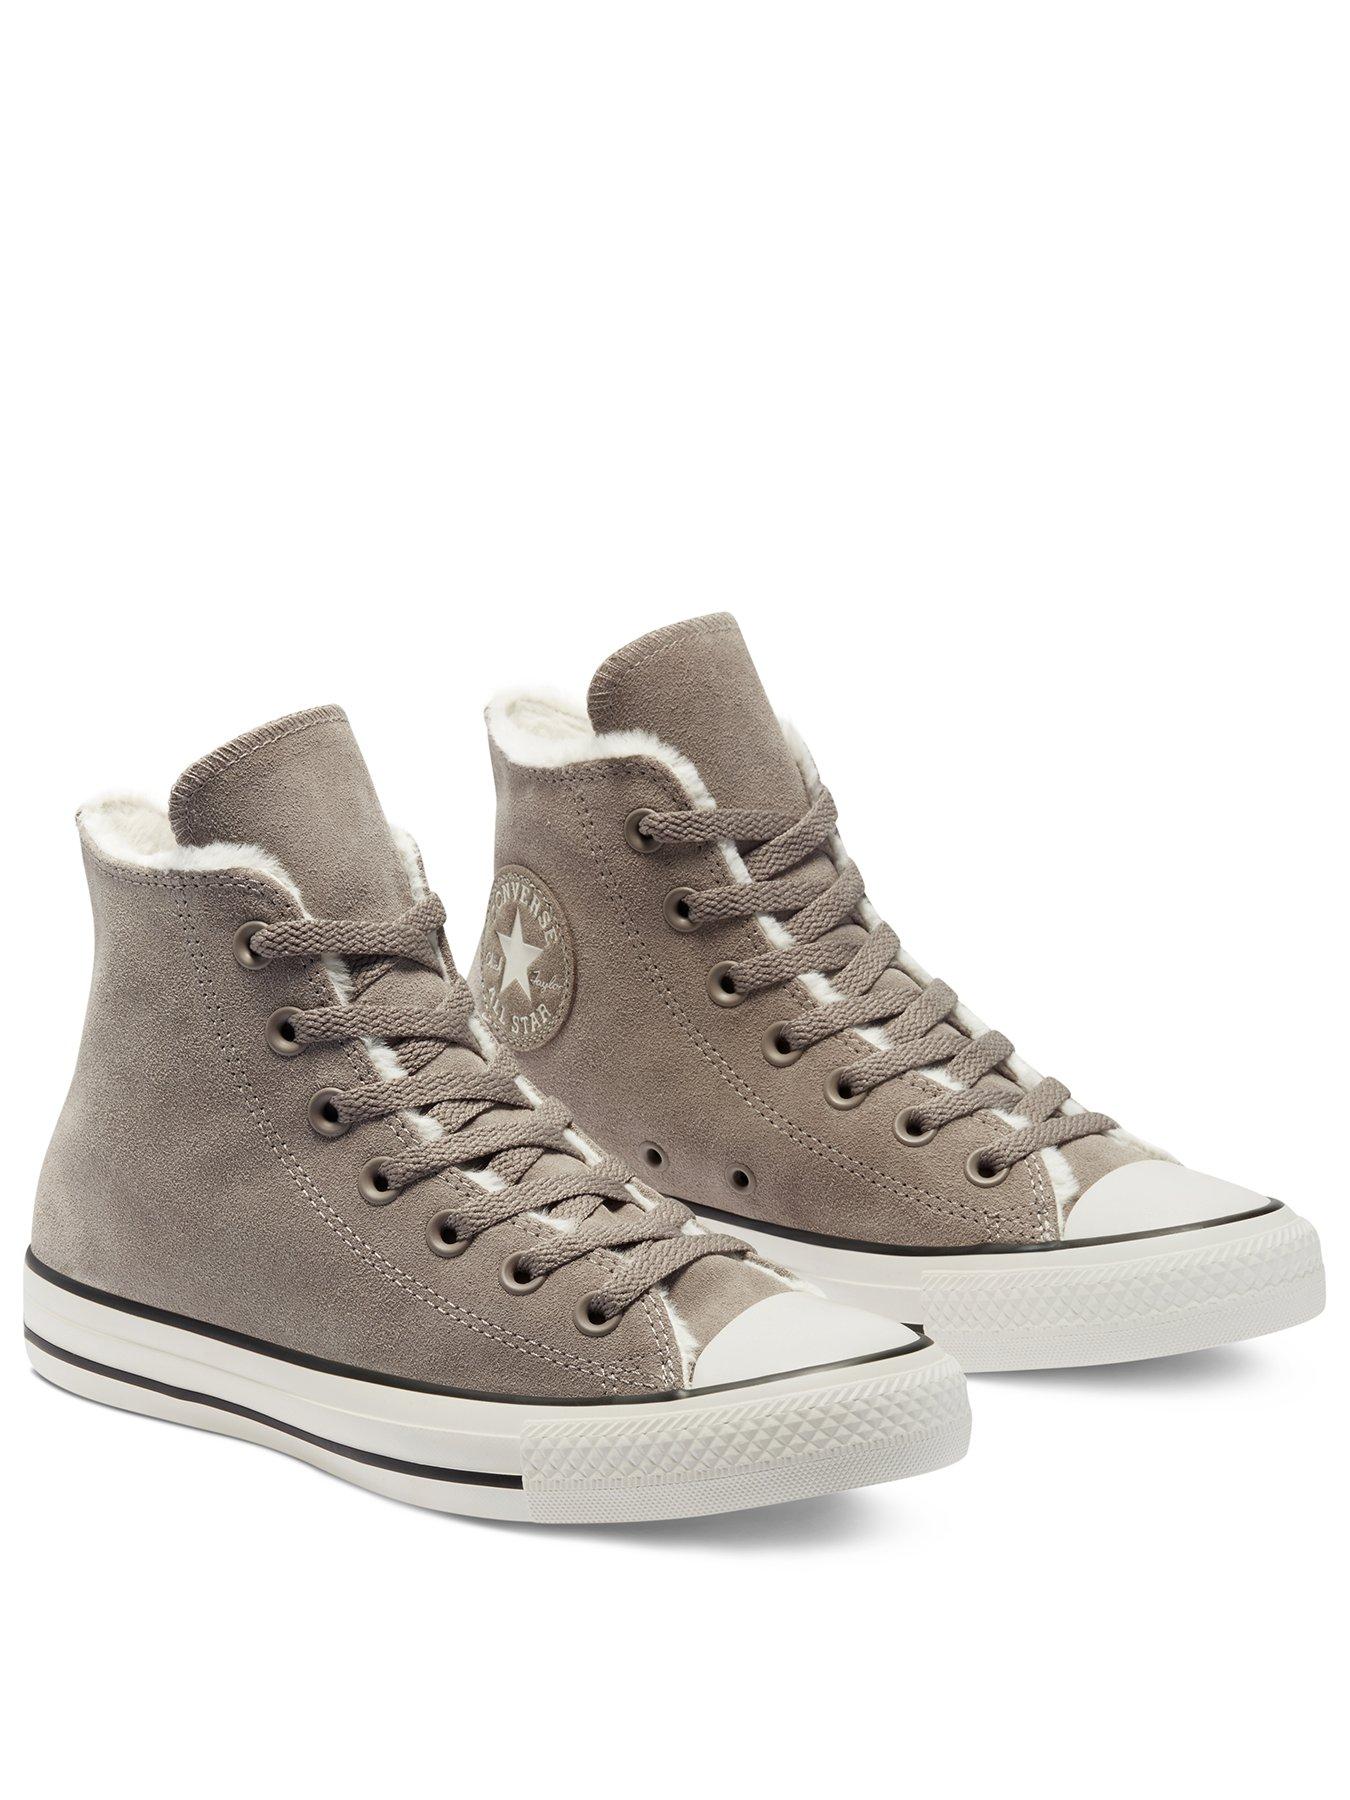 fur lined converse shoes